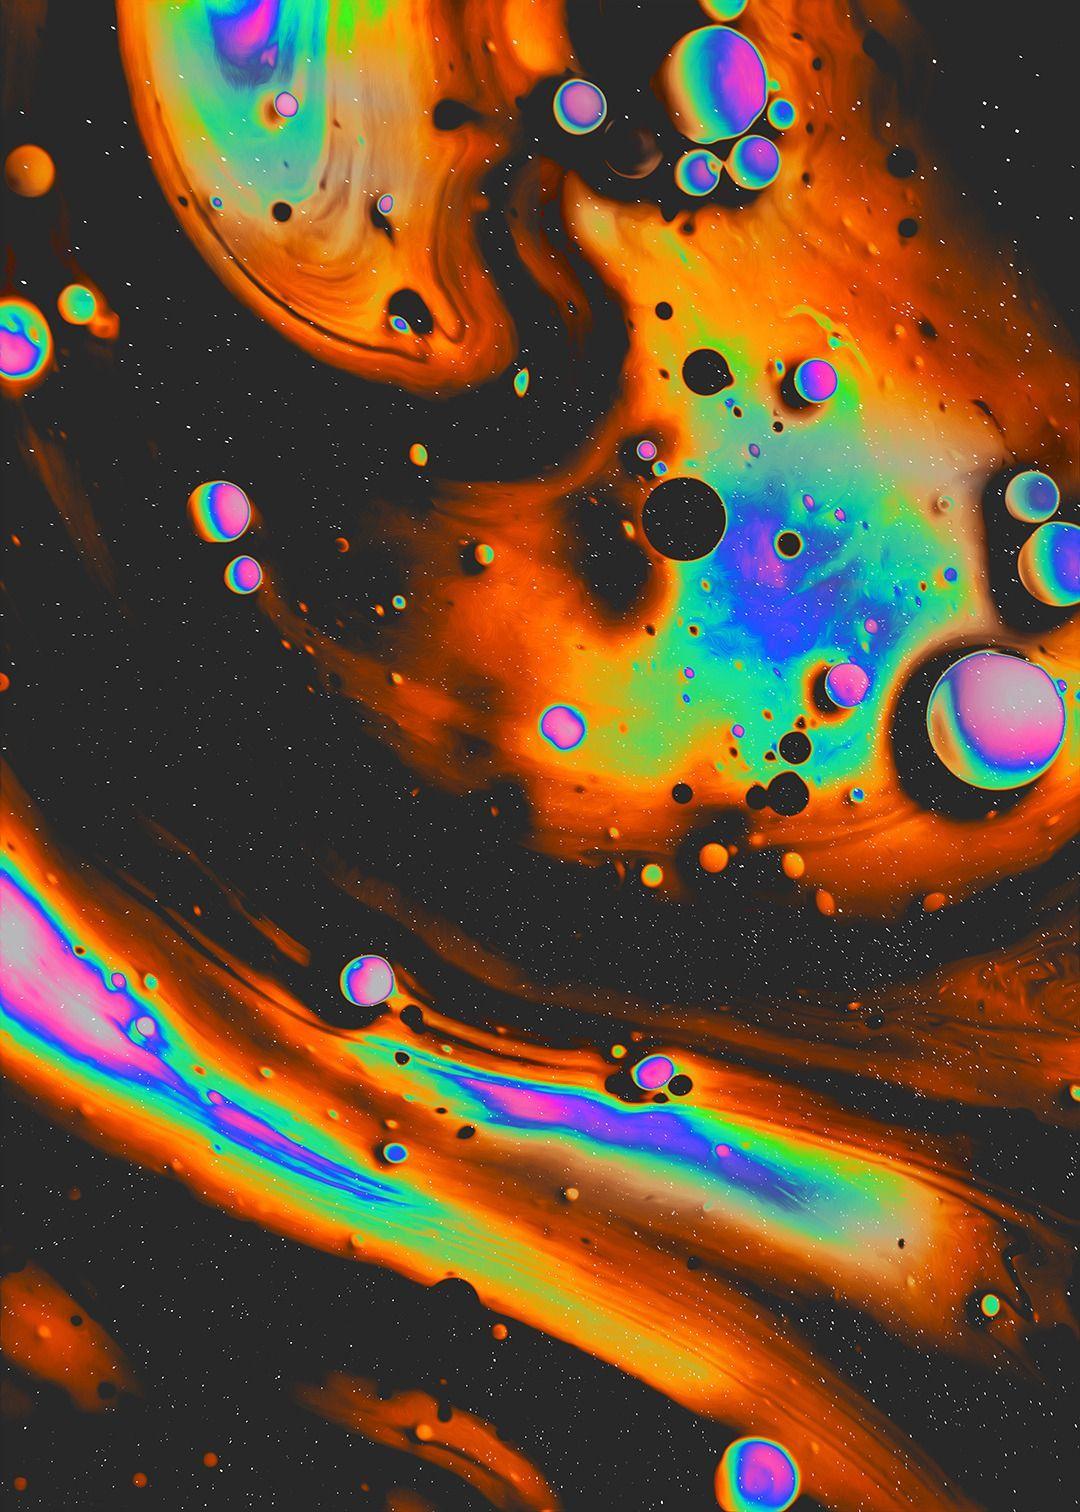 Space Trippy Wallpapers - Top Free Space Trippy Backgrounds